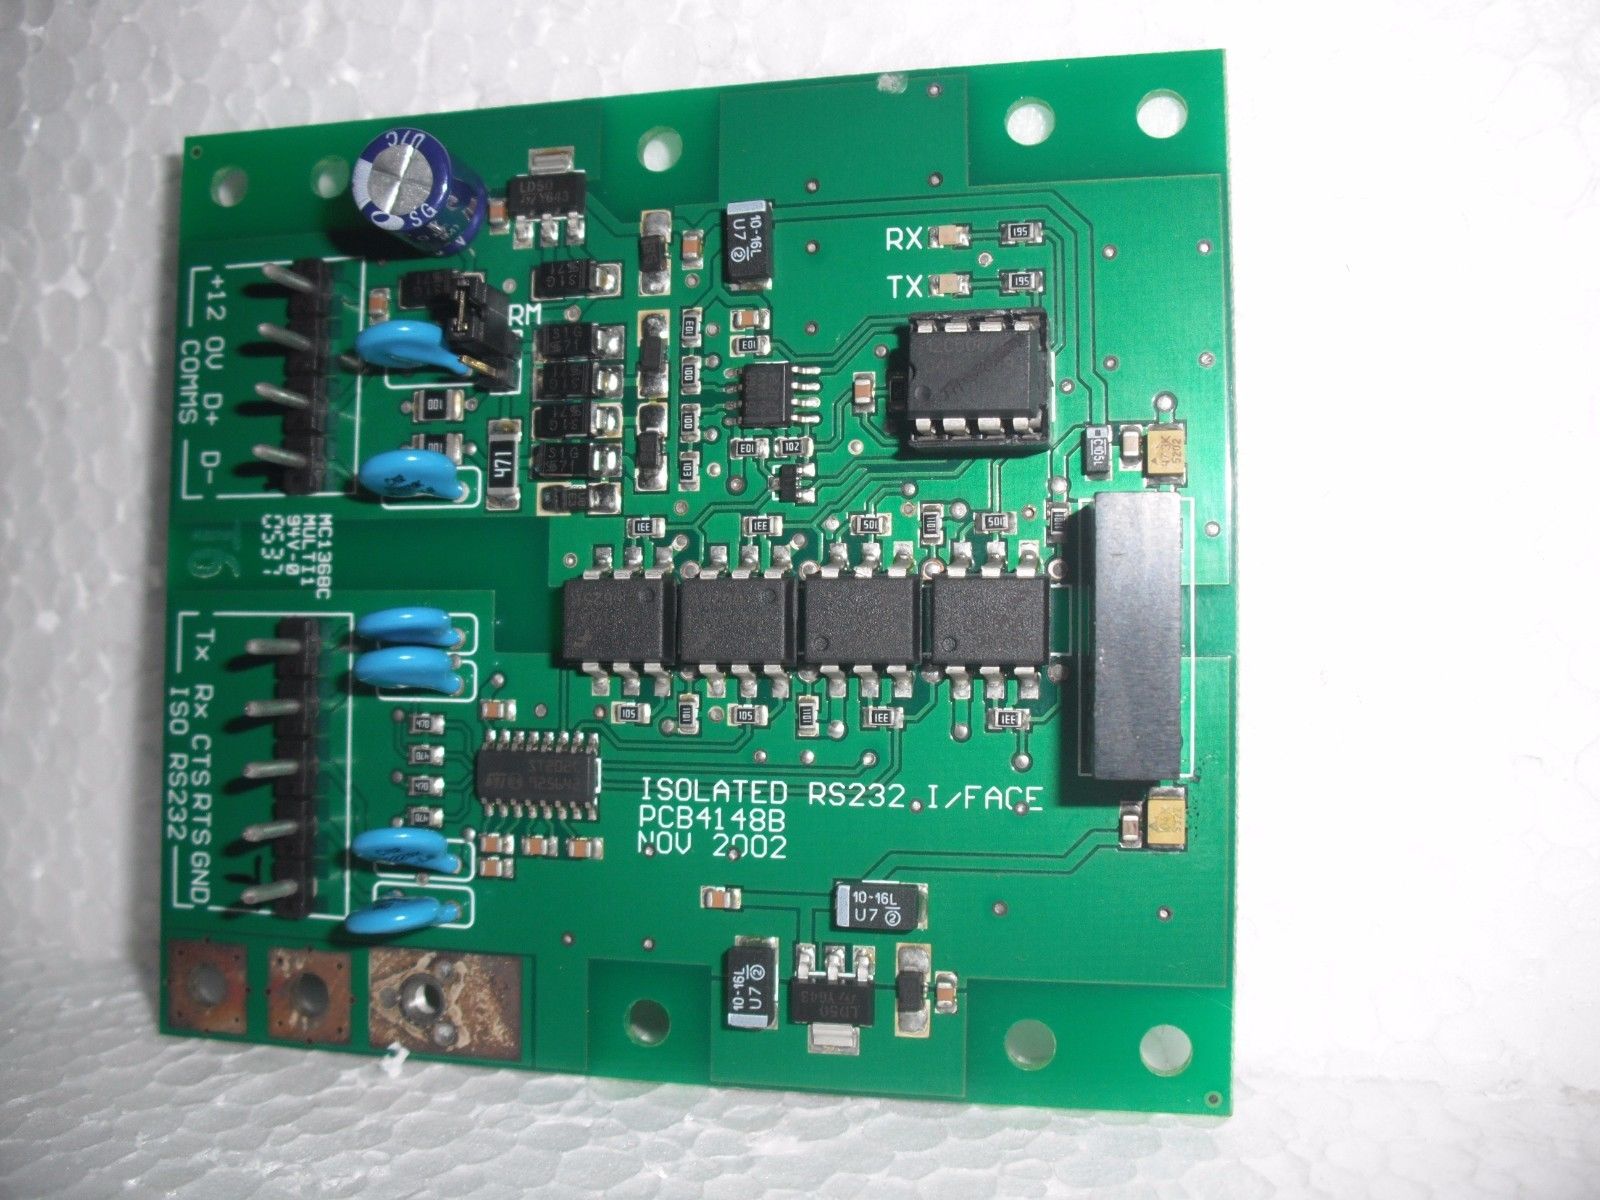 TS0894 PCB4148B Isolated Rs232 Interface Card